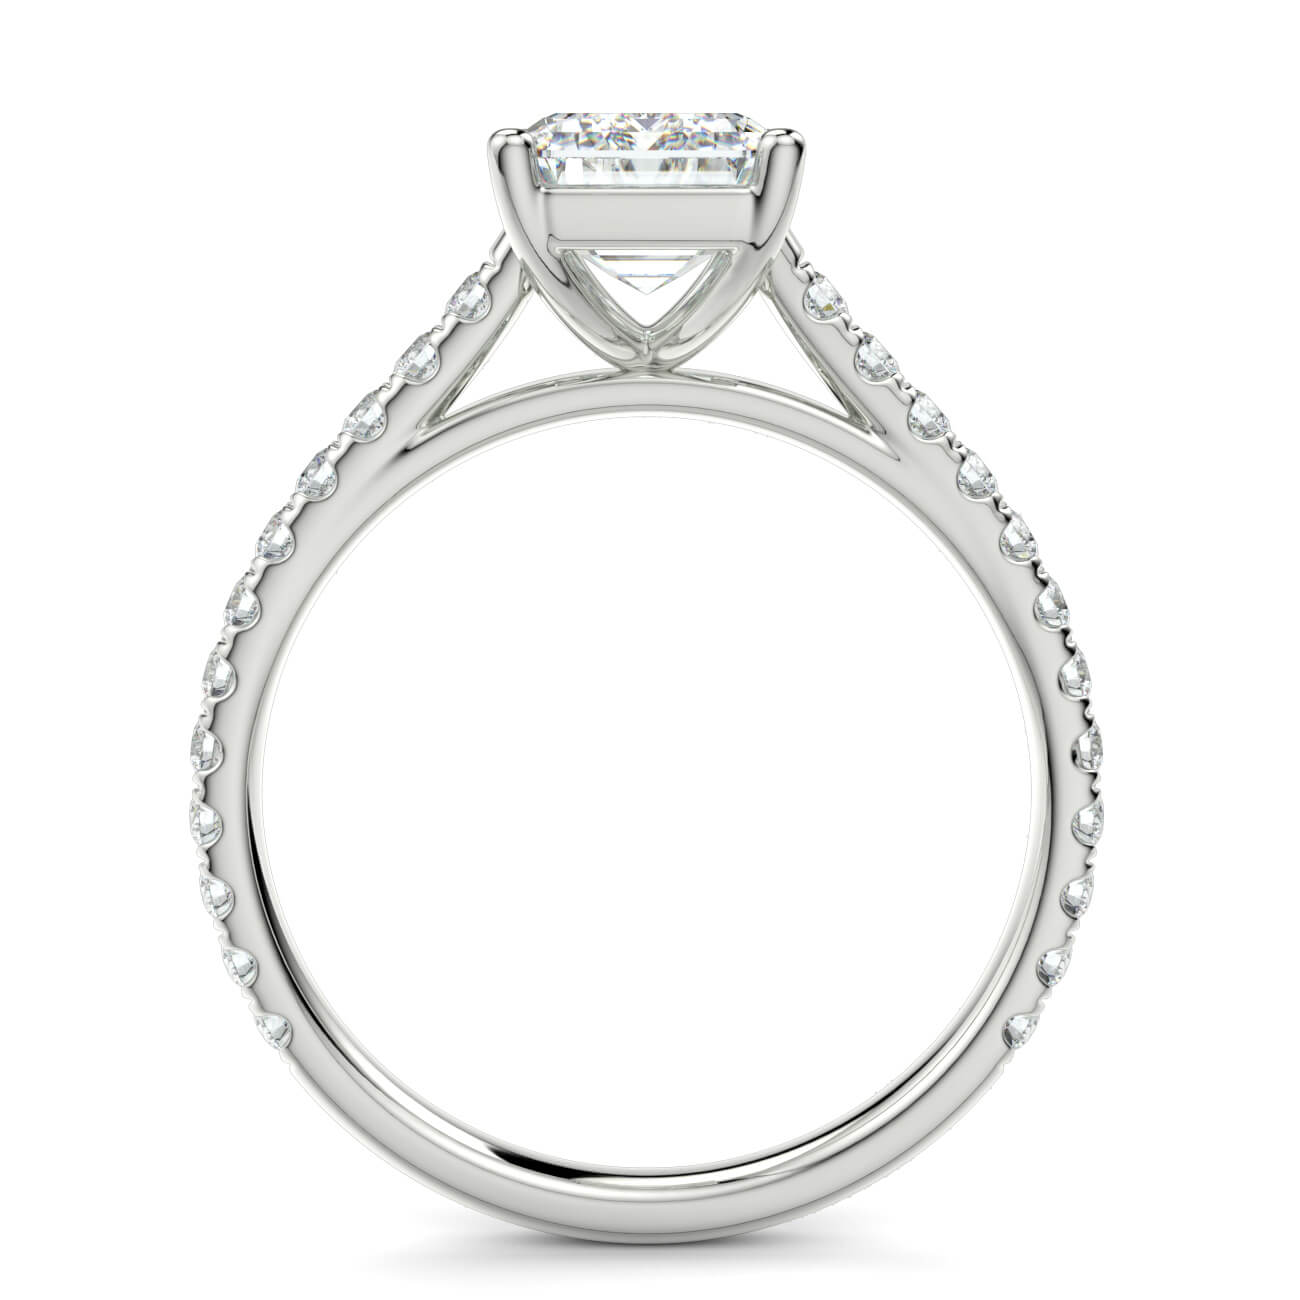 Emerald Cut diamond cathedral engagement ring in white gold – Australian Diamond Network